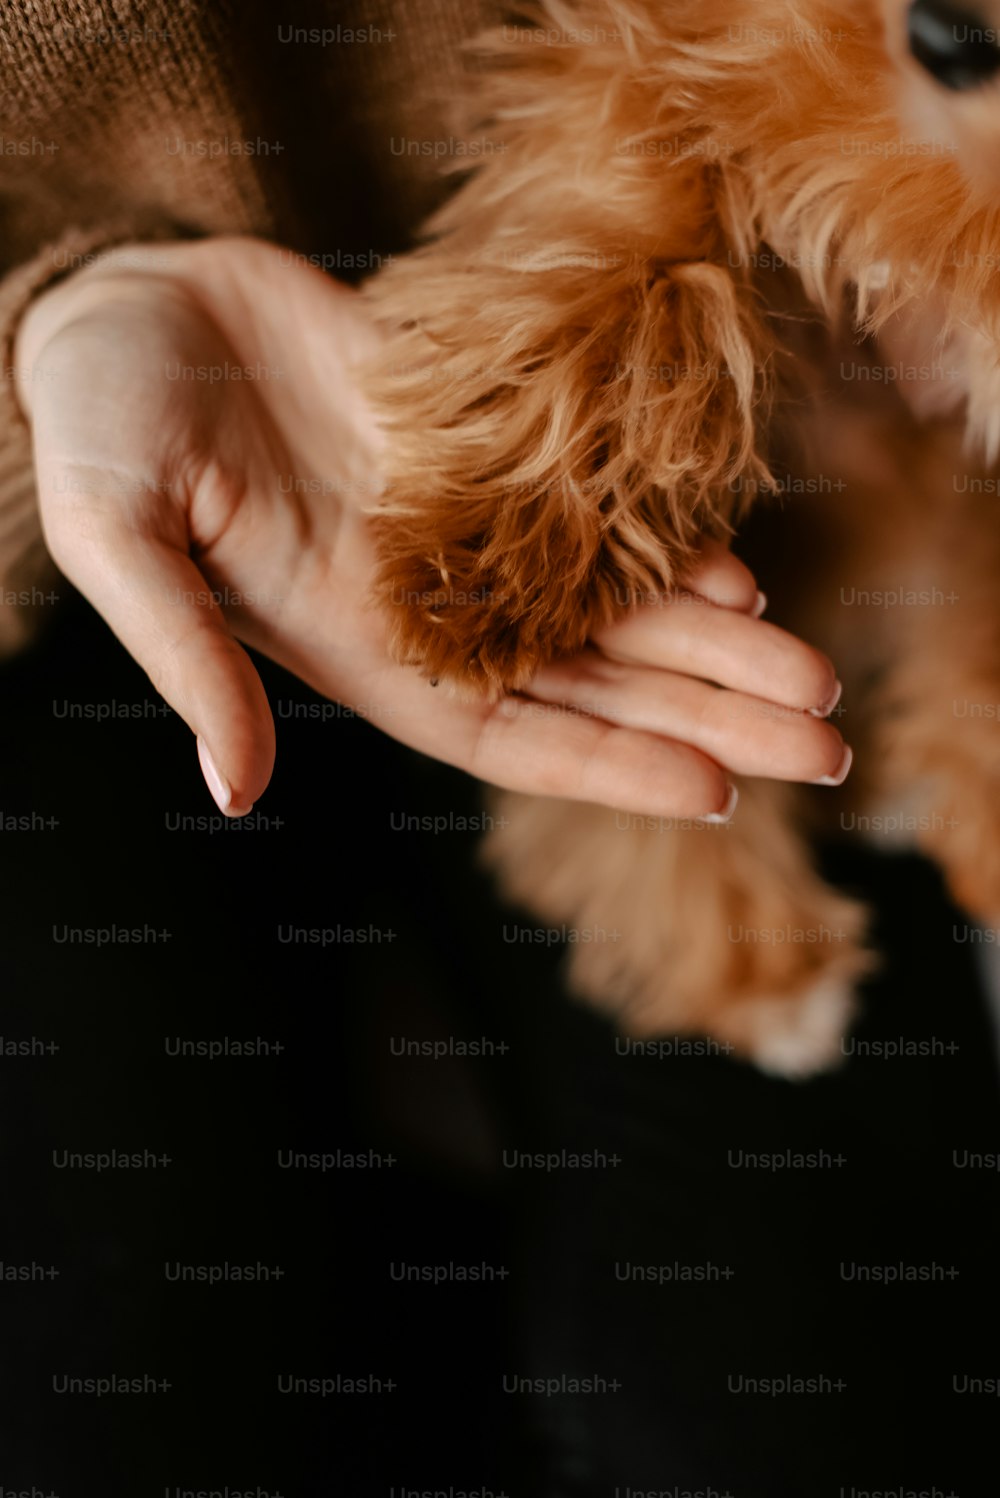 a person holding a small dog in their hands